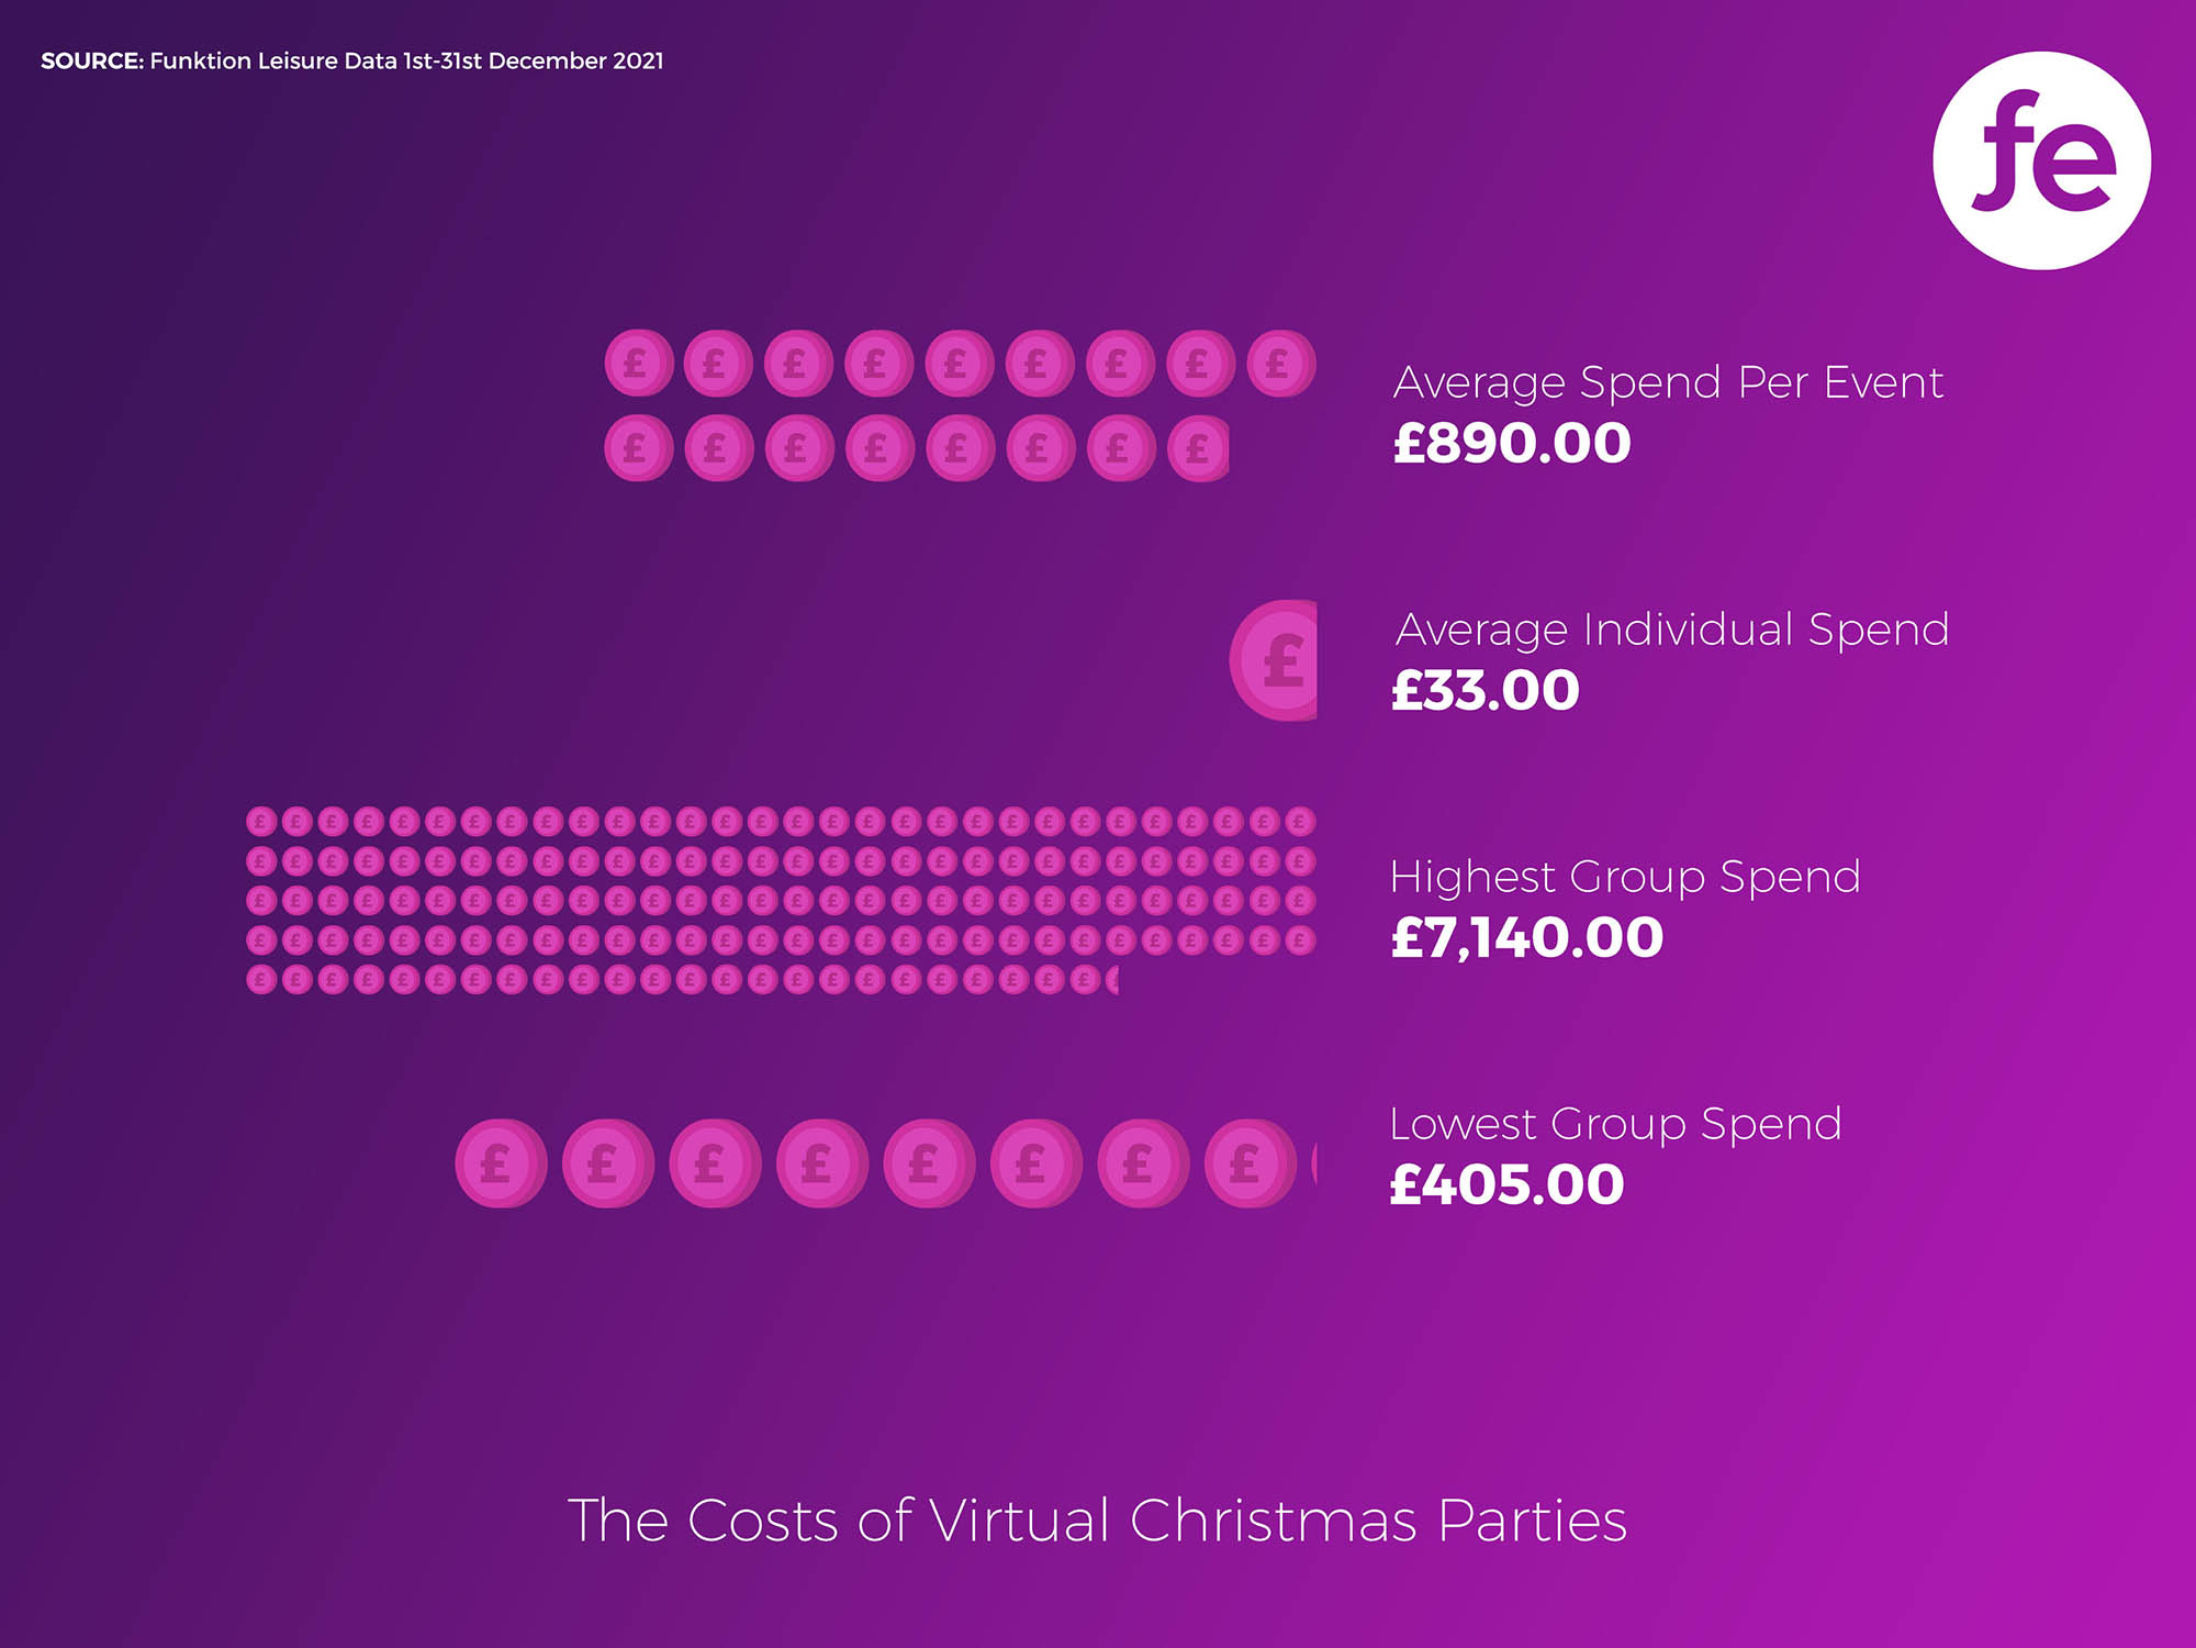 The Cost of a Virtual Christmas Party in 2021